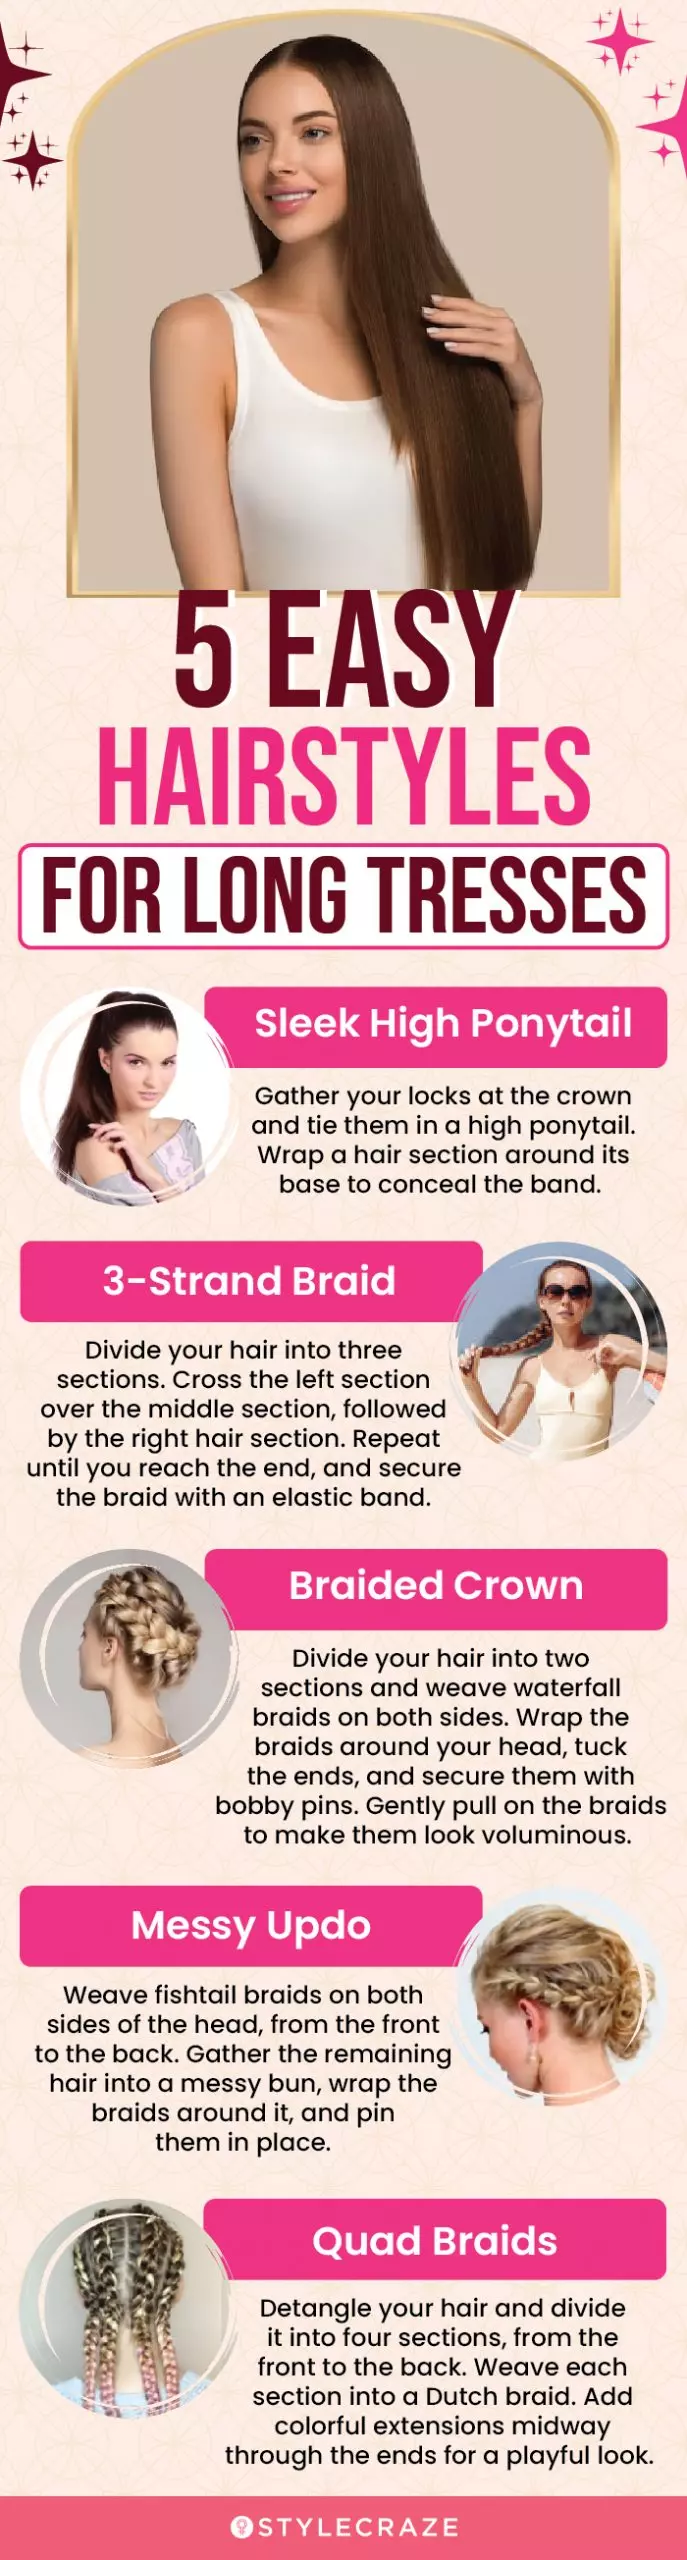 5 easy hairstyles for long tresses (infographic)